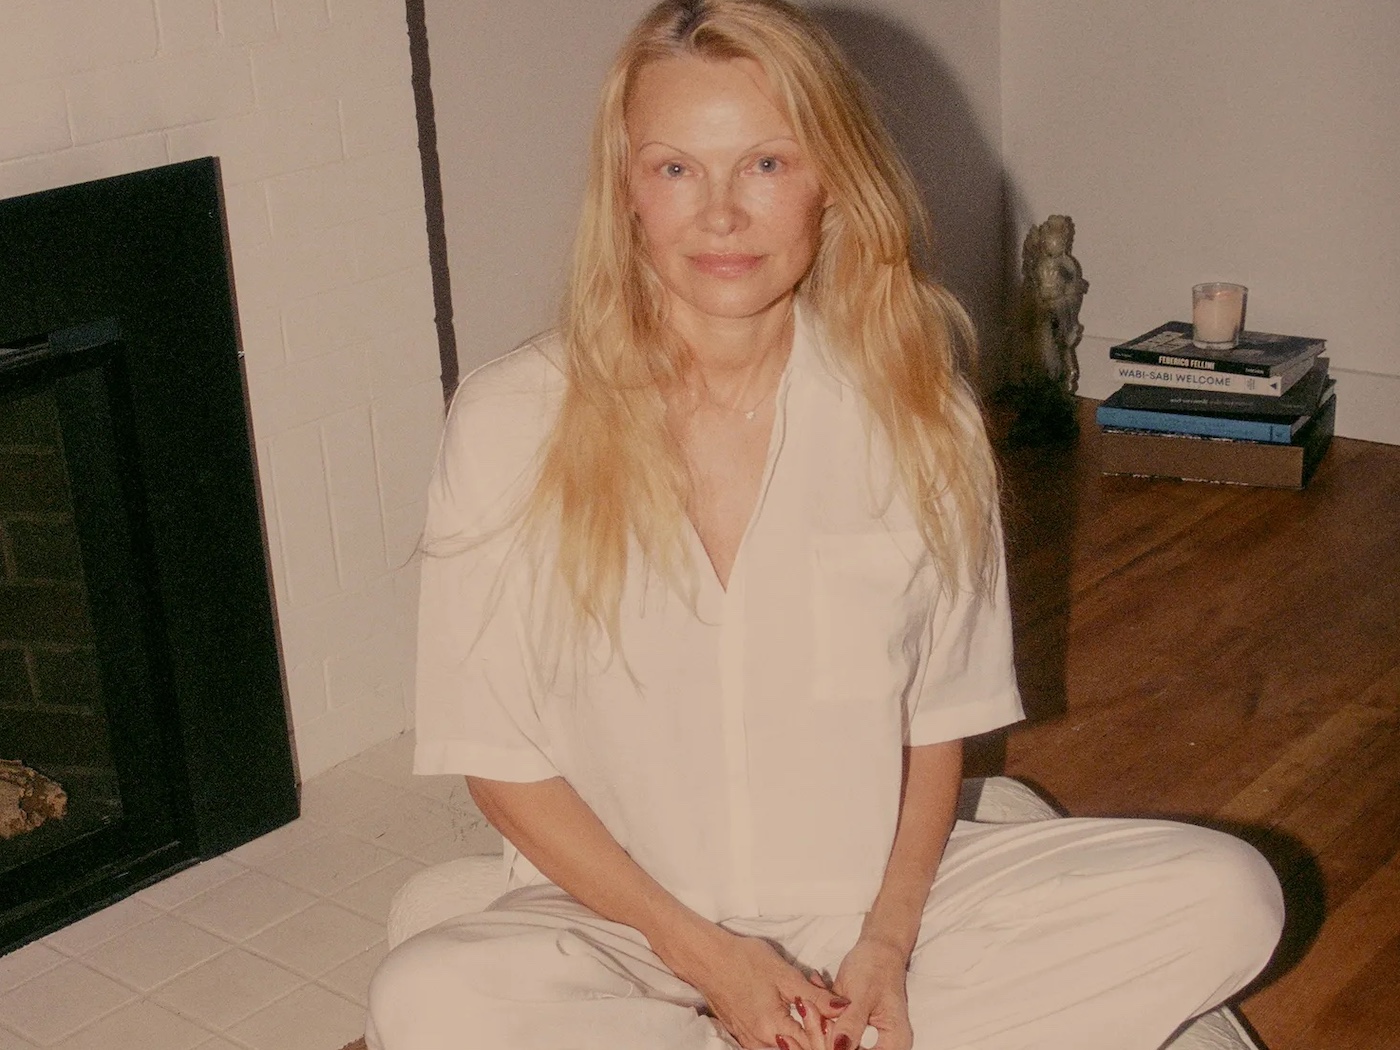 Pamela Anderson sits cross-legged in white pyjamas on a wooden floor in front of a fireplace.